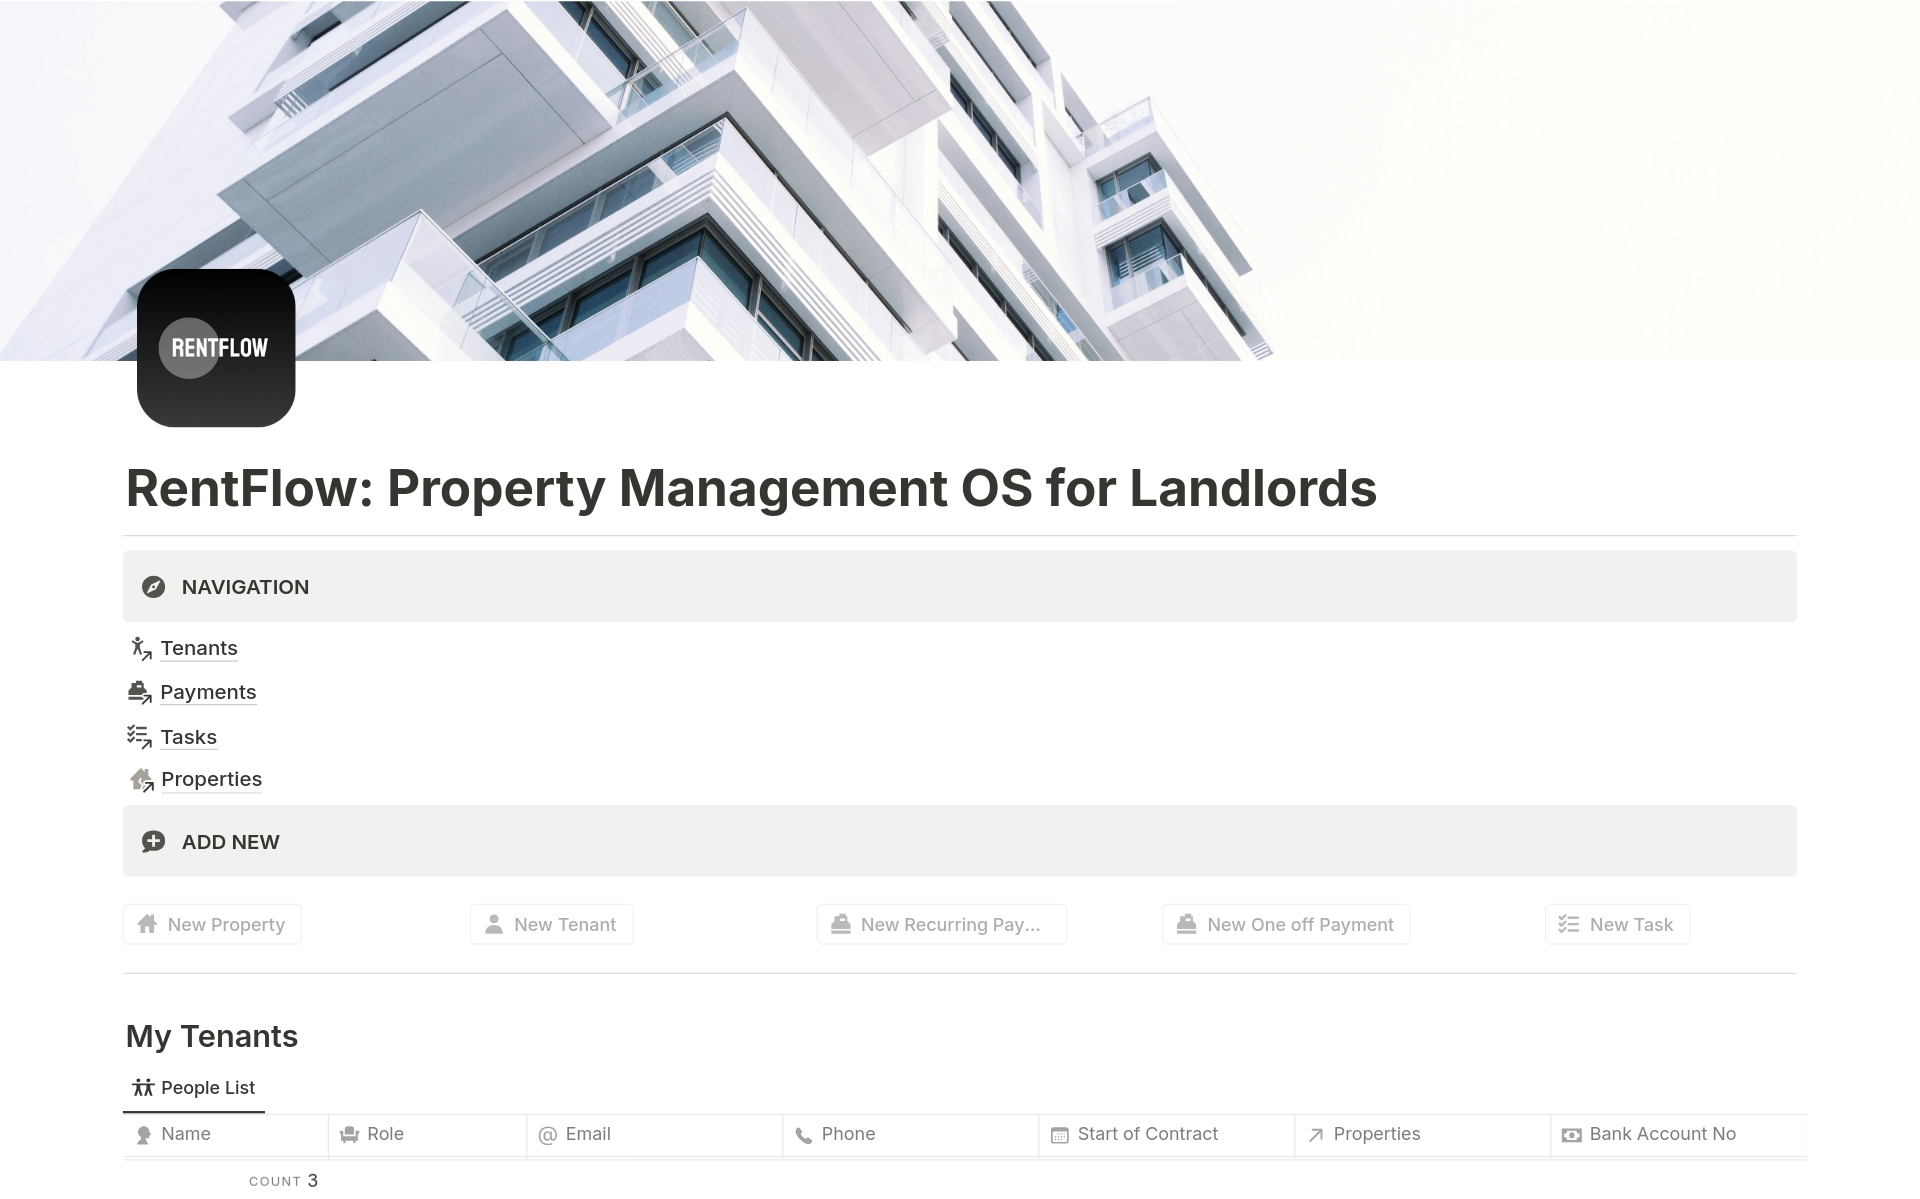 RentFlow: Simplify property management for landlords. Track properties, tenants, payments, maintenance, and documents in one organized workspace. Take control of your real estate portfolio effortlessly.